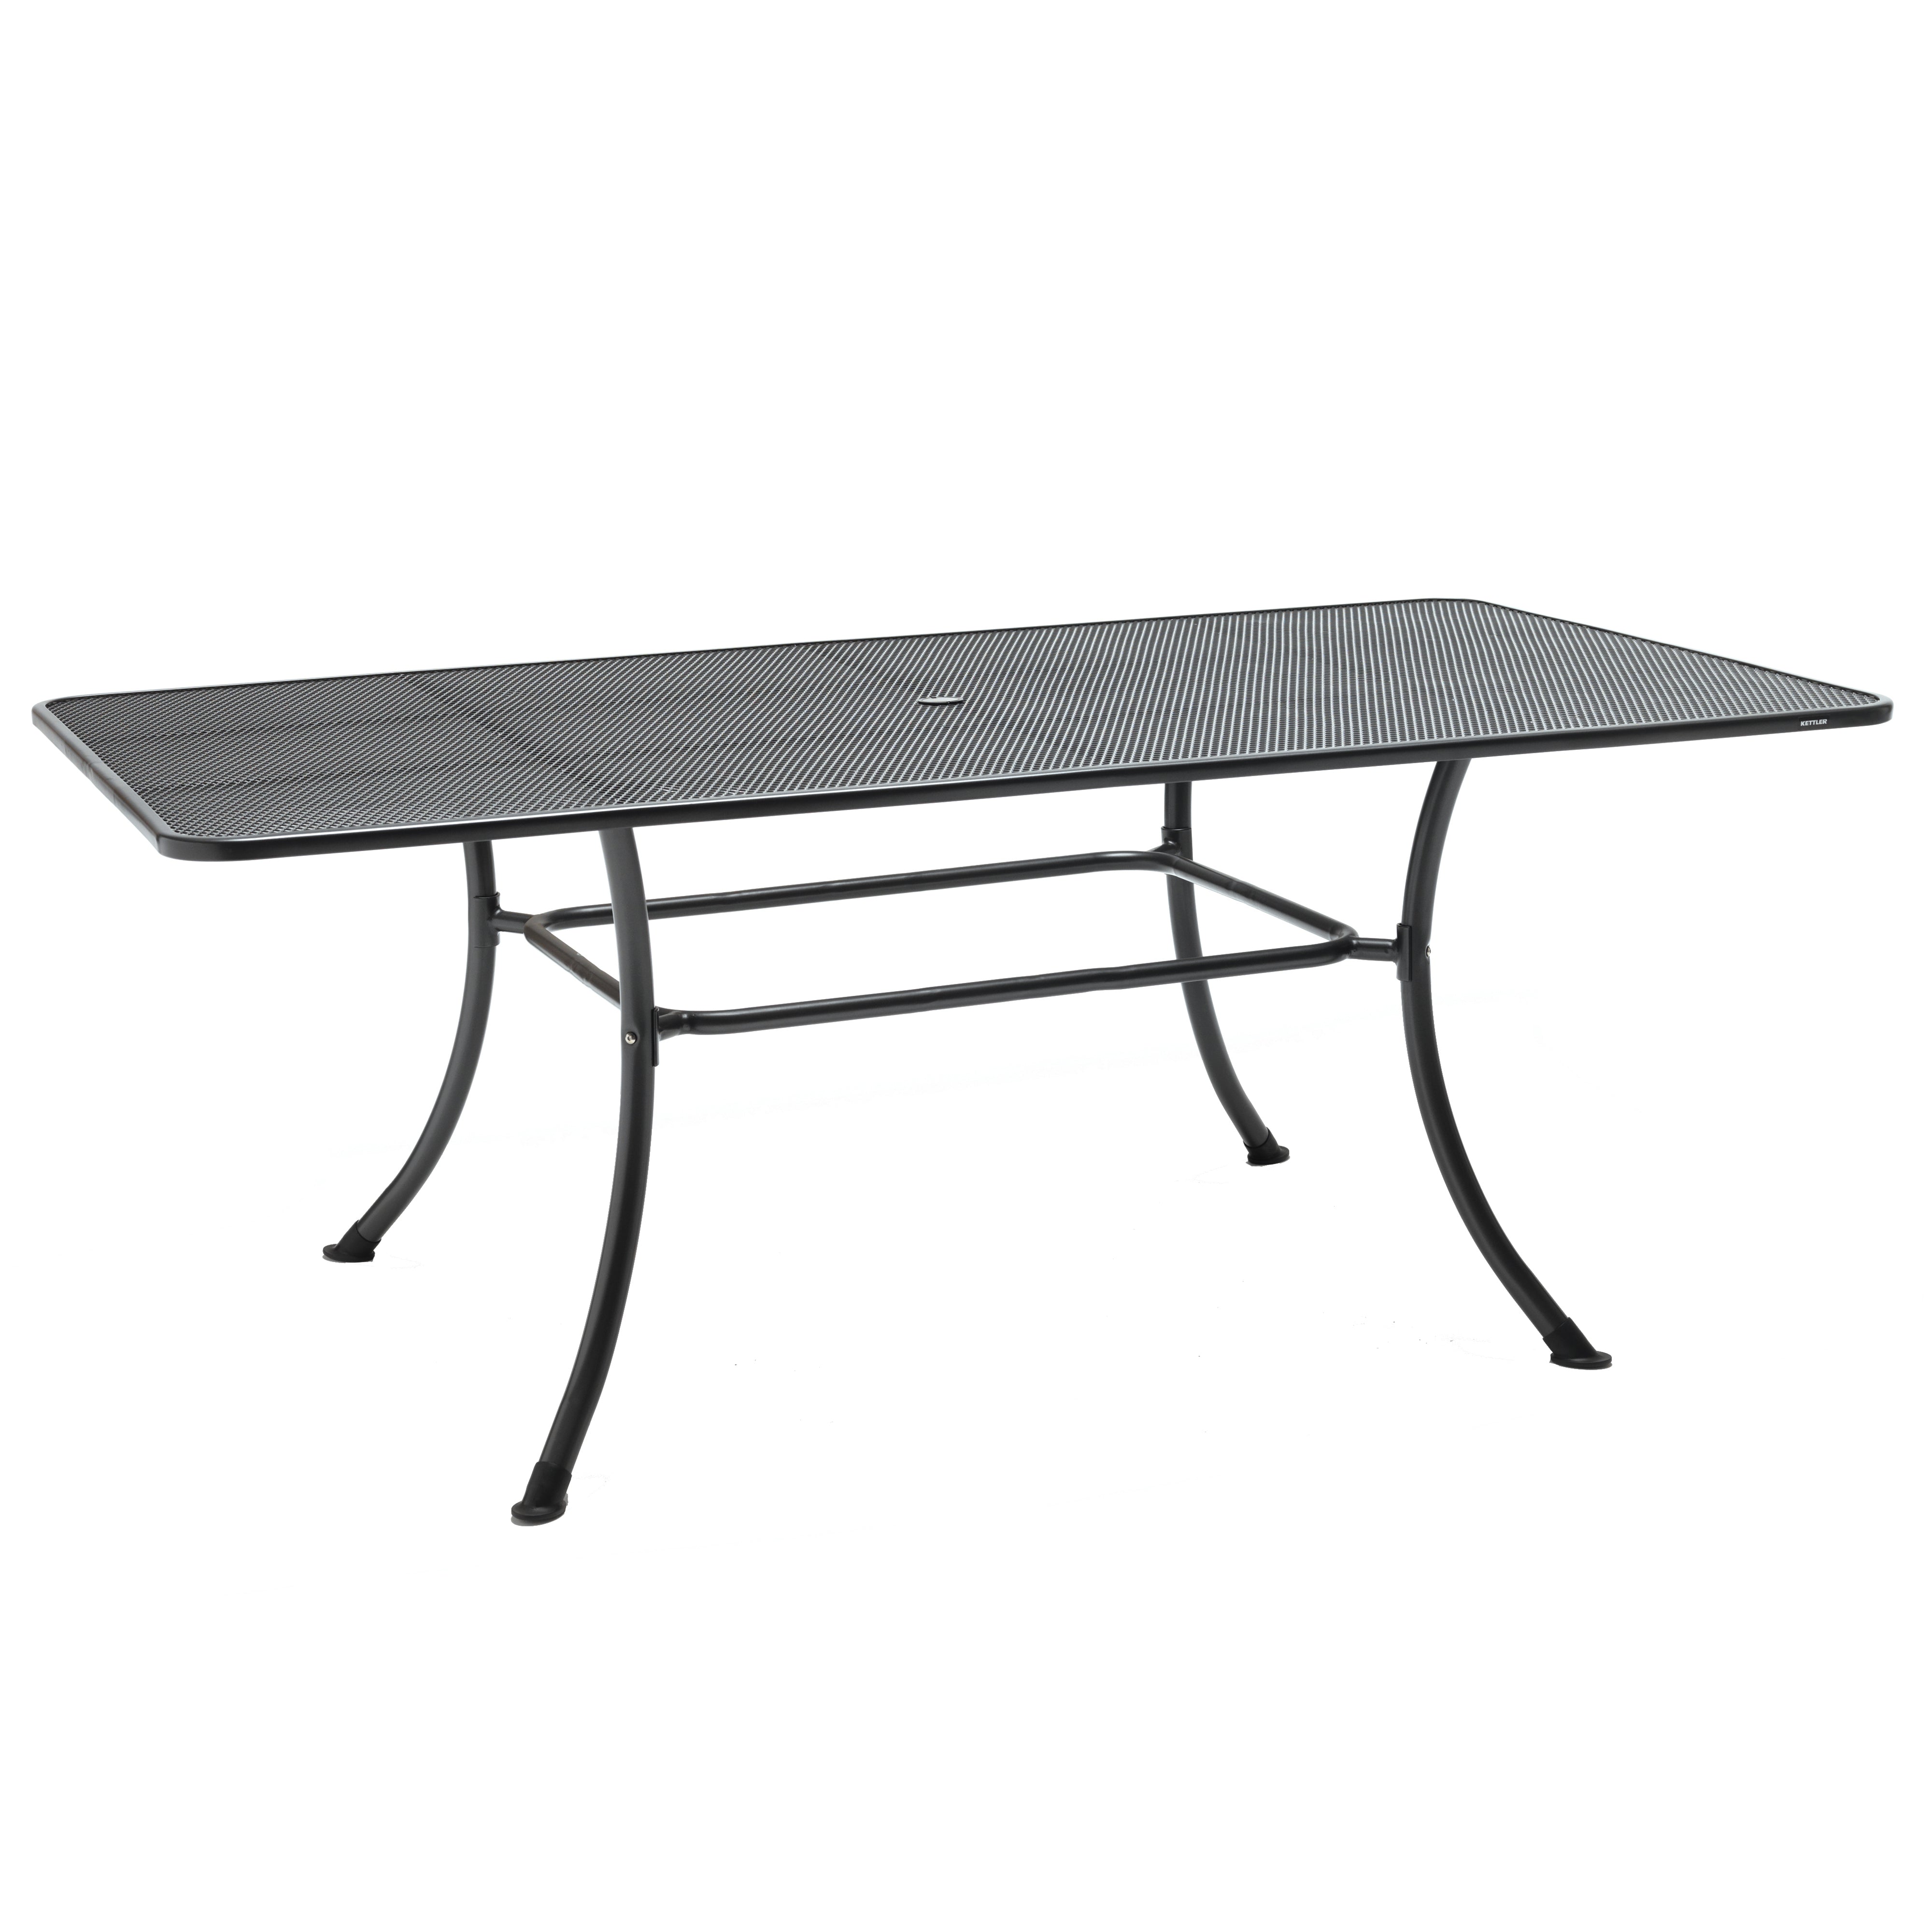 Rectangular wrought iron table for 6 people 